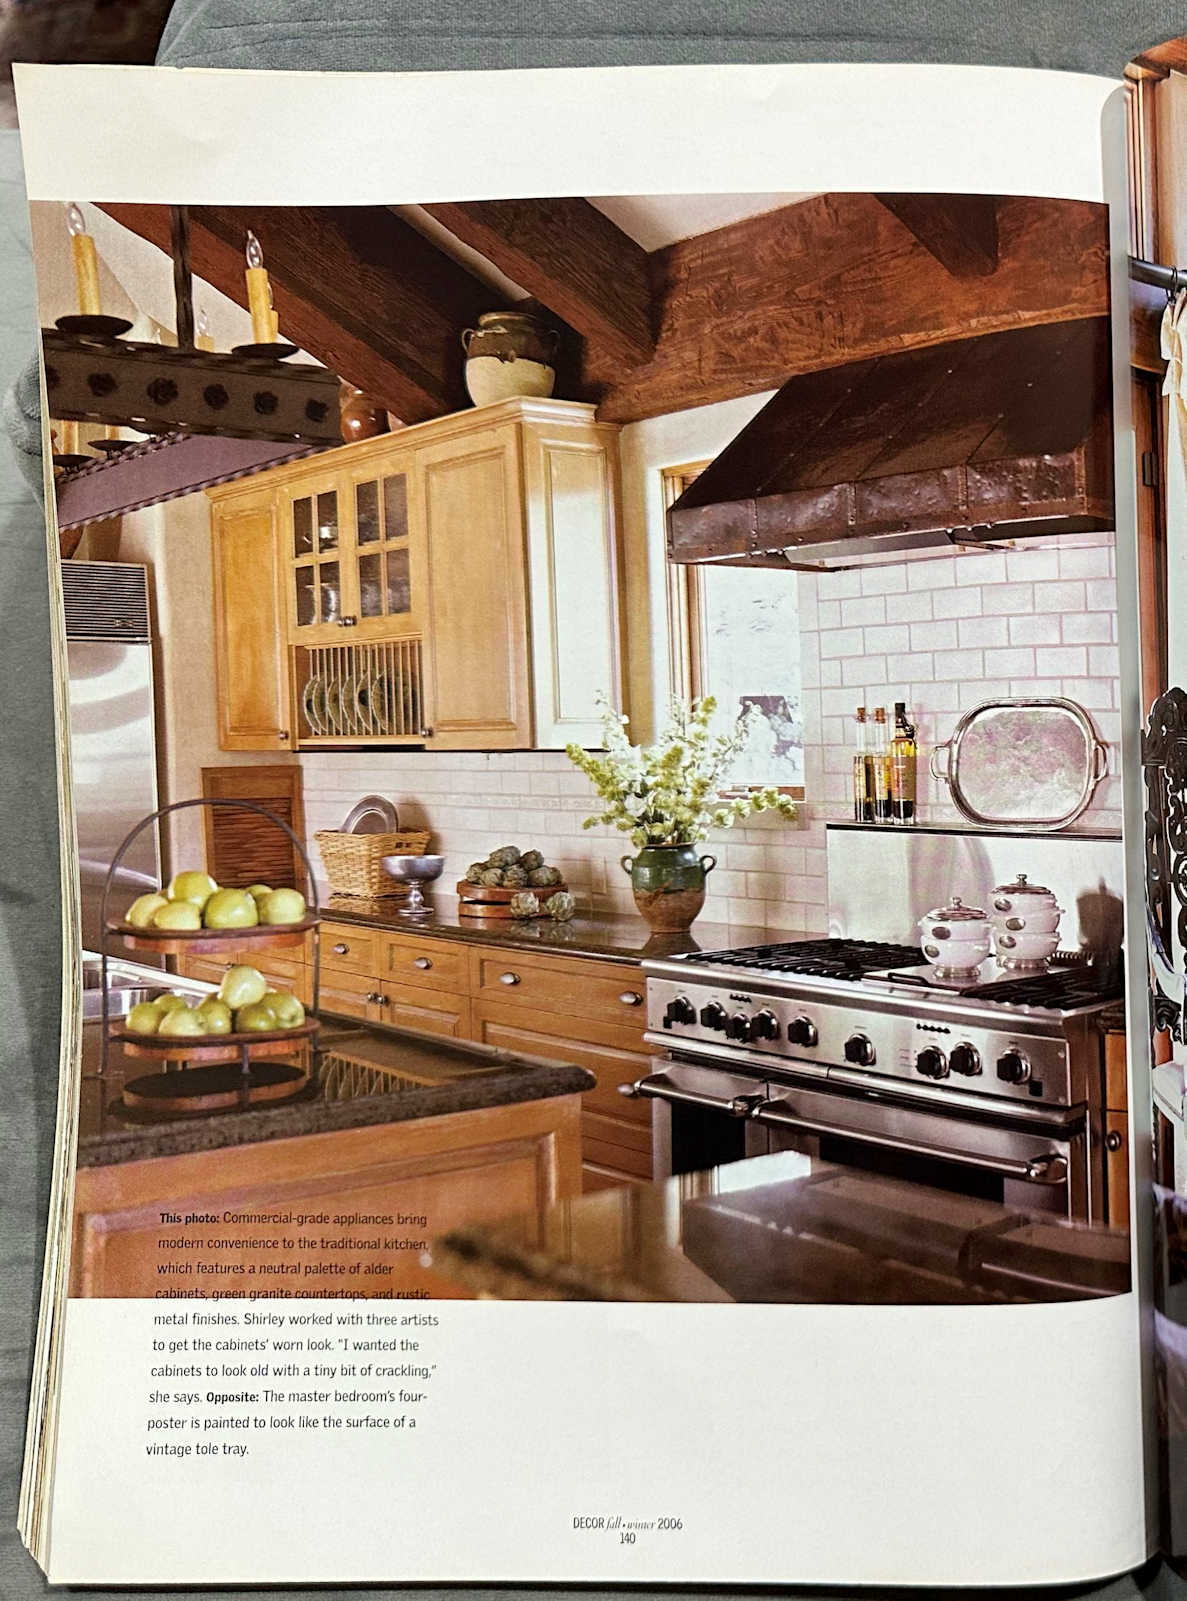 Kitchen design from 2006. Is there such a thing as timeless kitchen design?